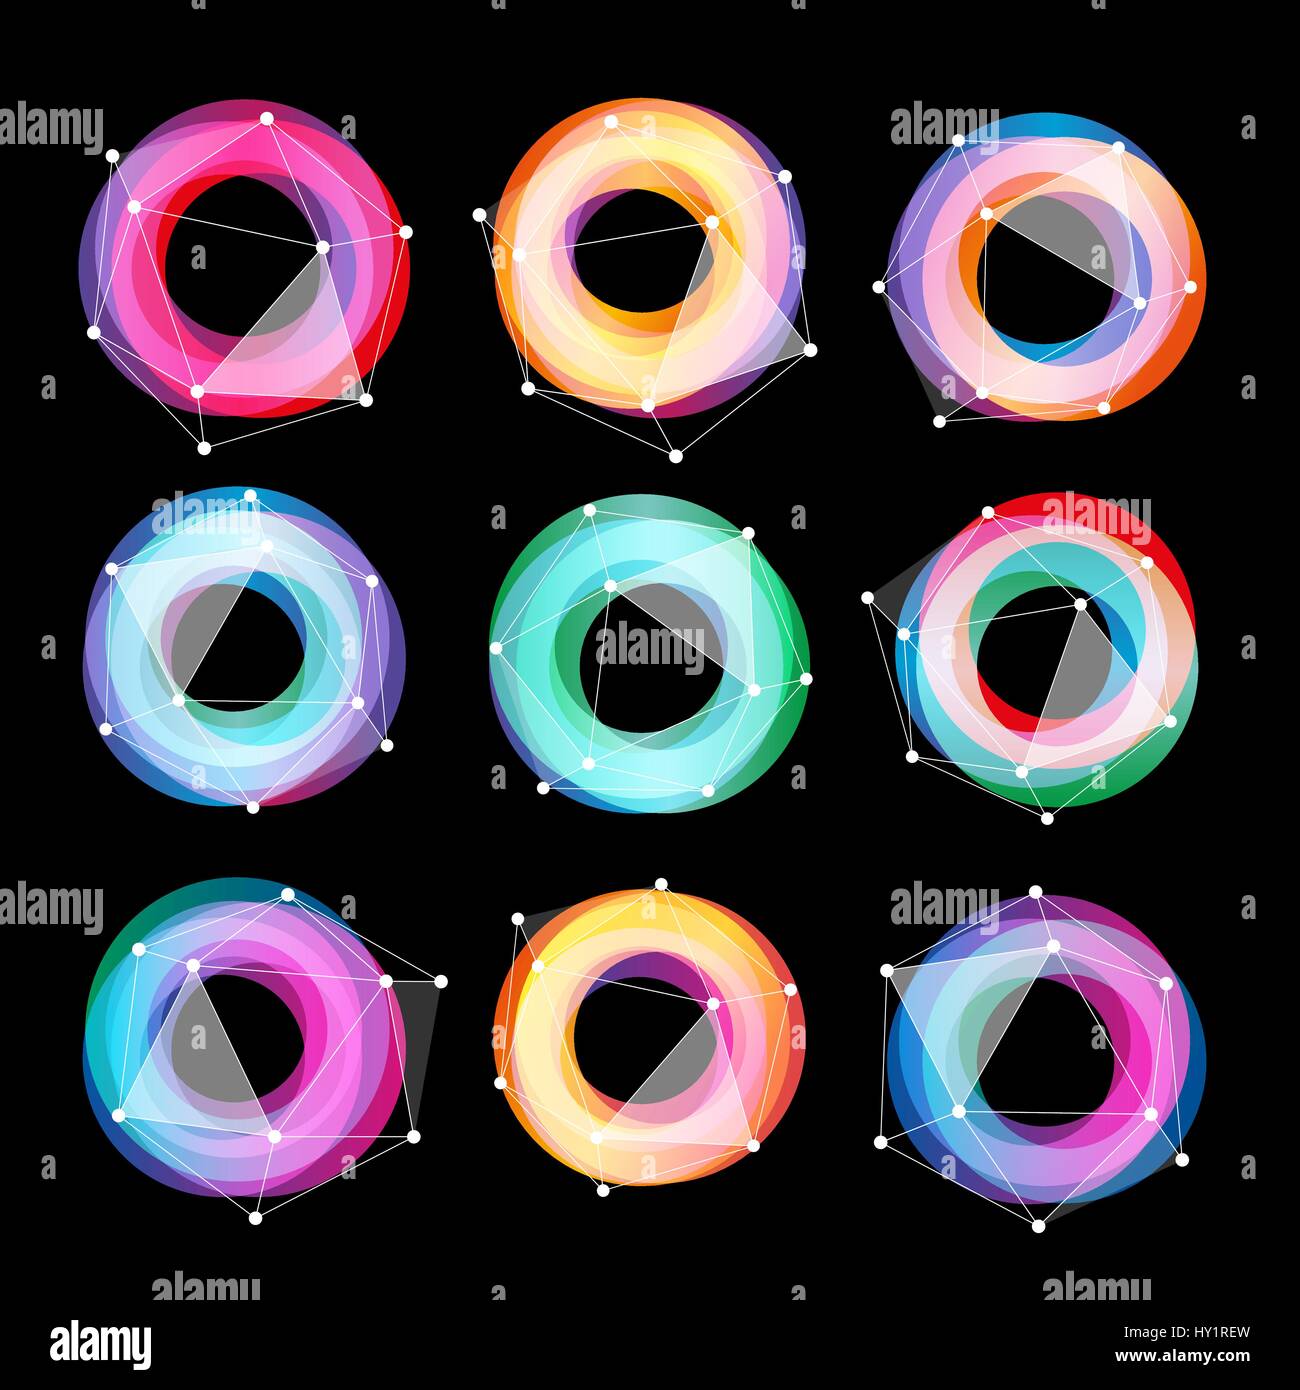 Unusual abstract geometric shapes vector logo set. Circular colorful logotypes collection on the black background. Stock Vector